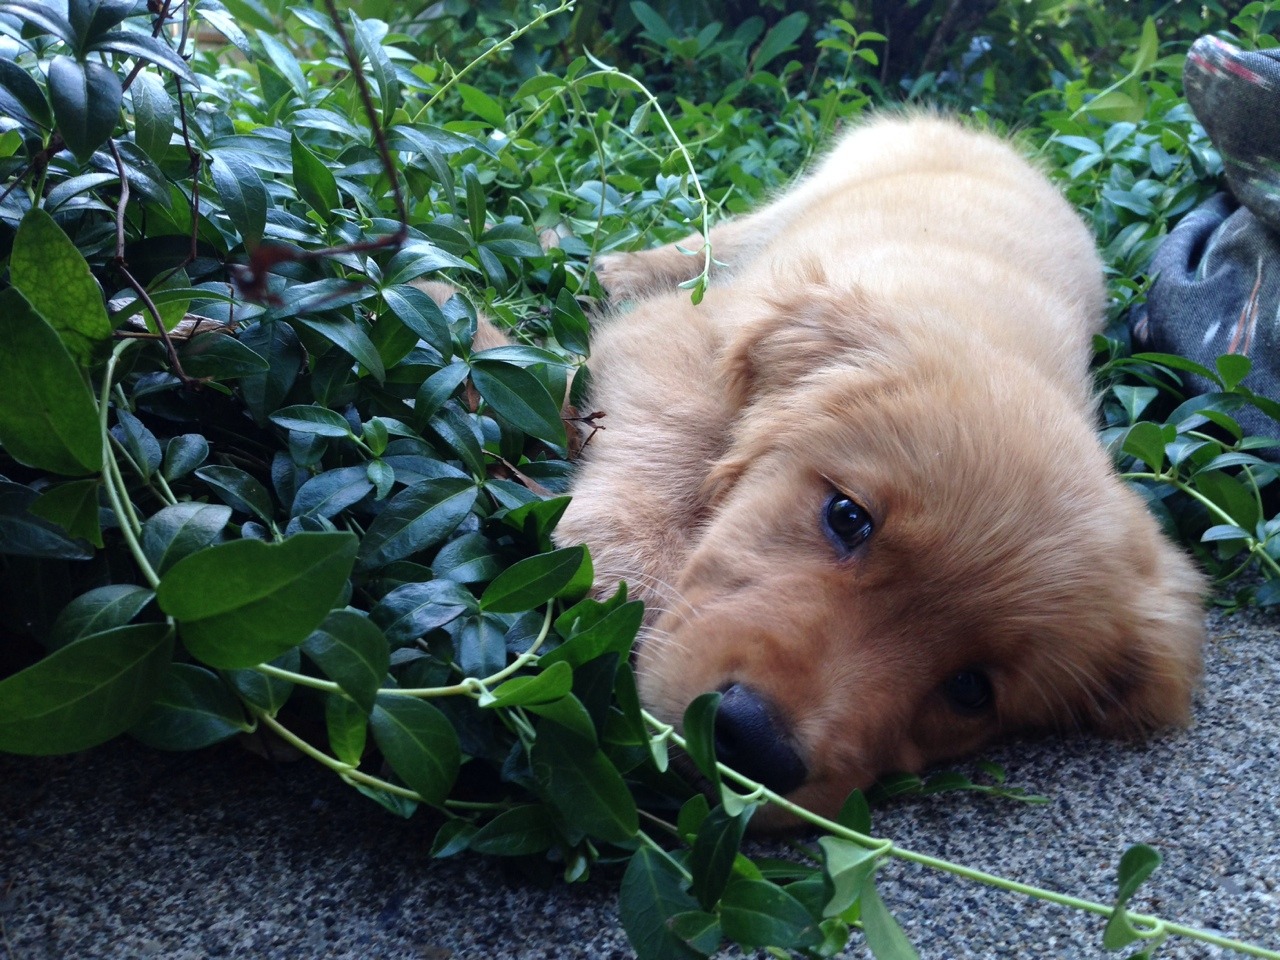 spermbanker:  i met this pretty lady today who likes to sleep in plants 